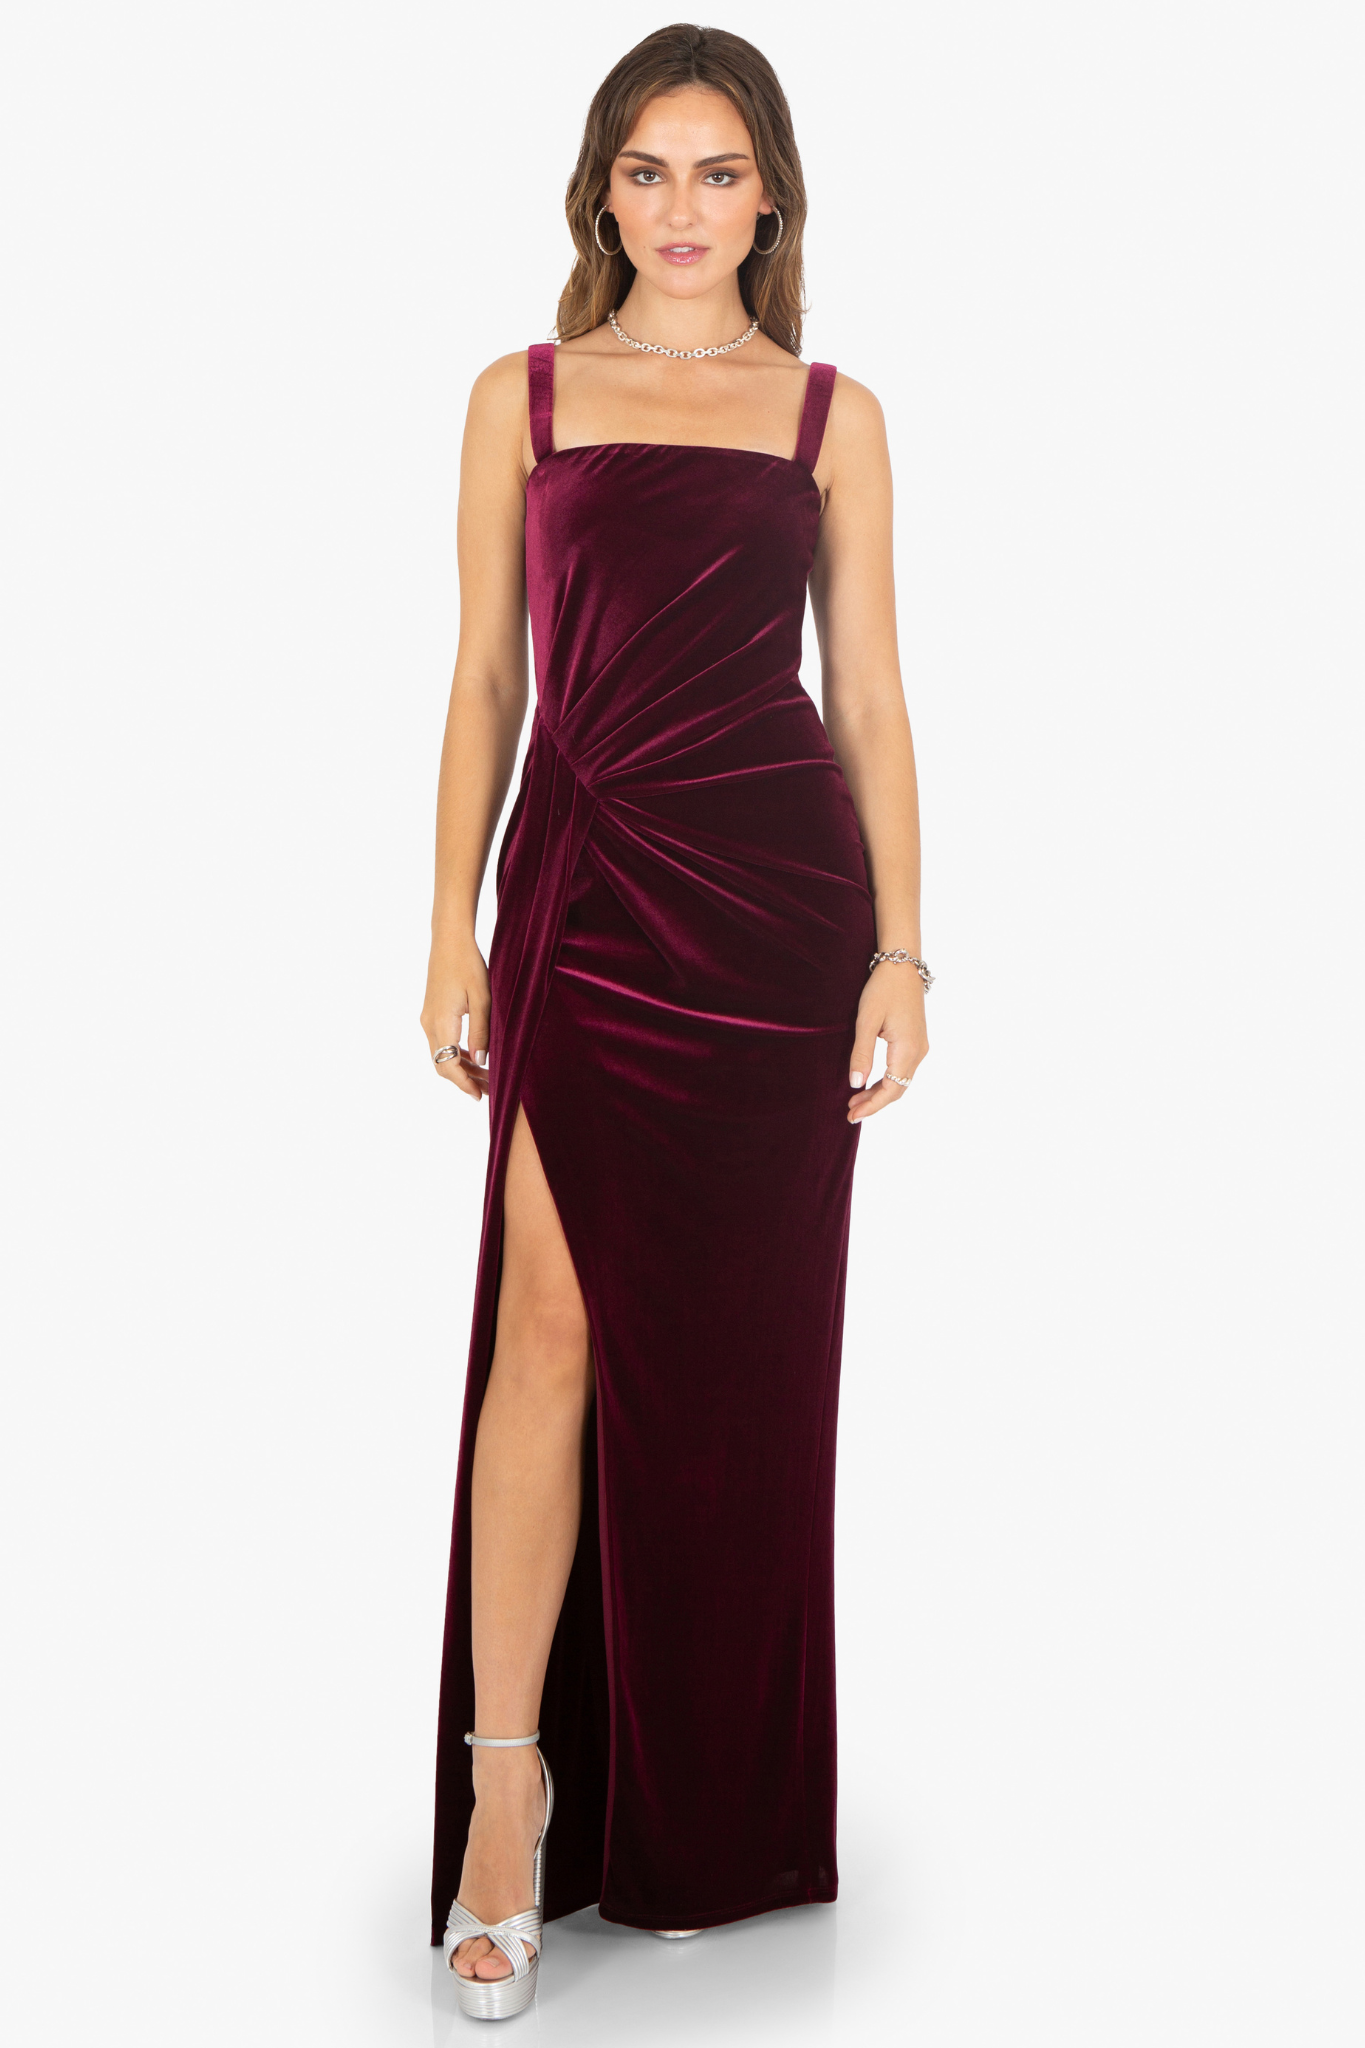 Domino Gown in Burgundy by Black Halo - RENTAL